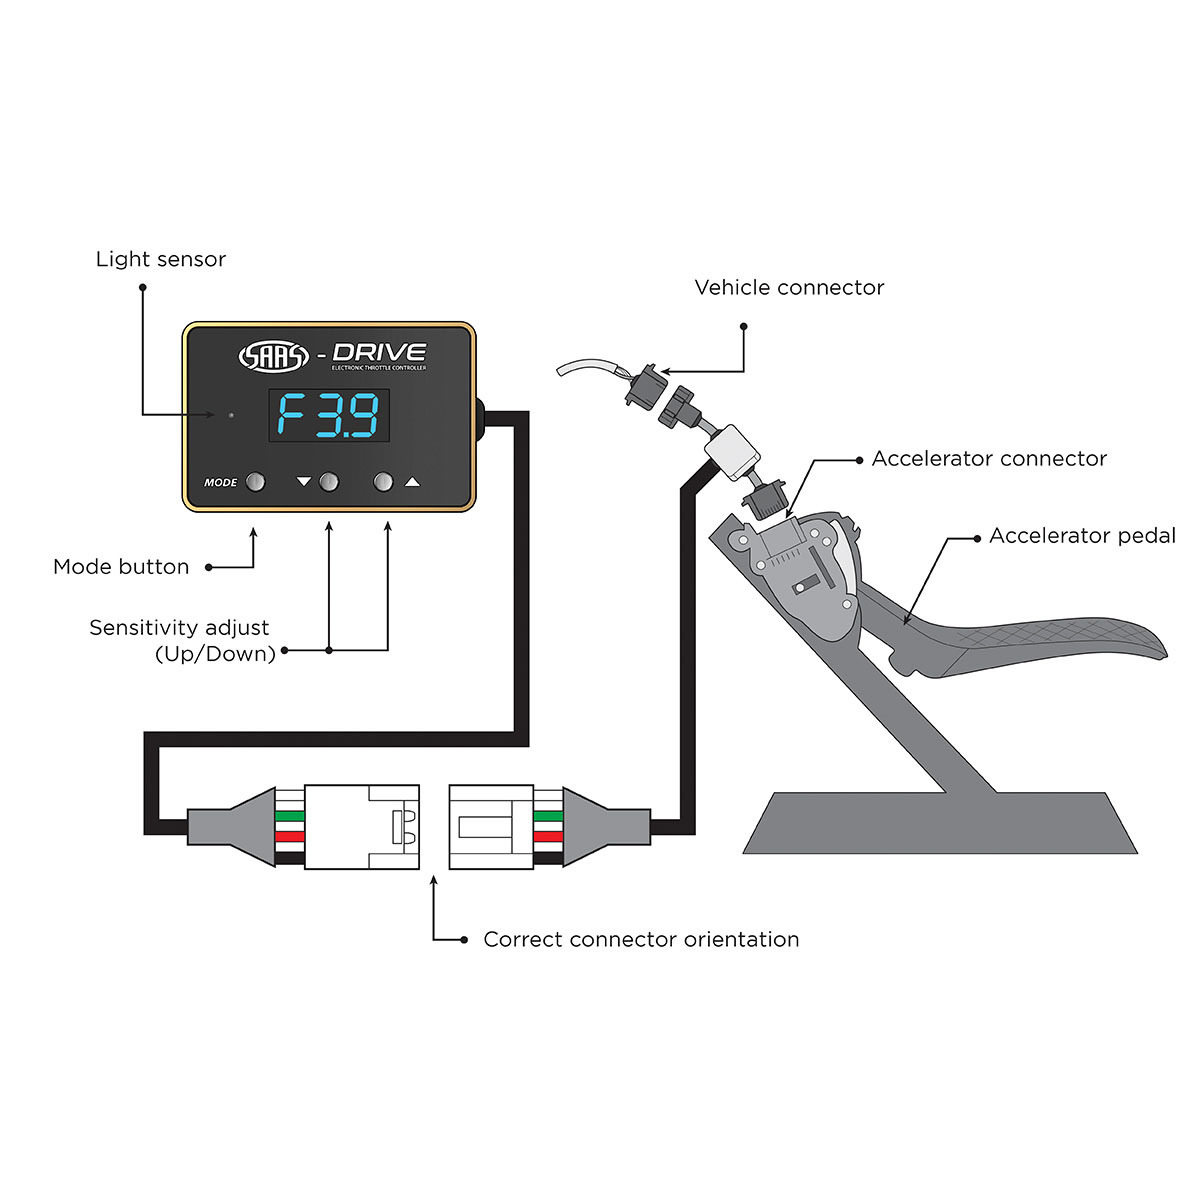 SAAS-Drive Maybach 57S W240 2005 - 2012 Throttle Controller 